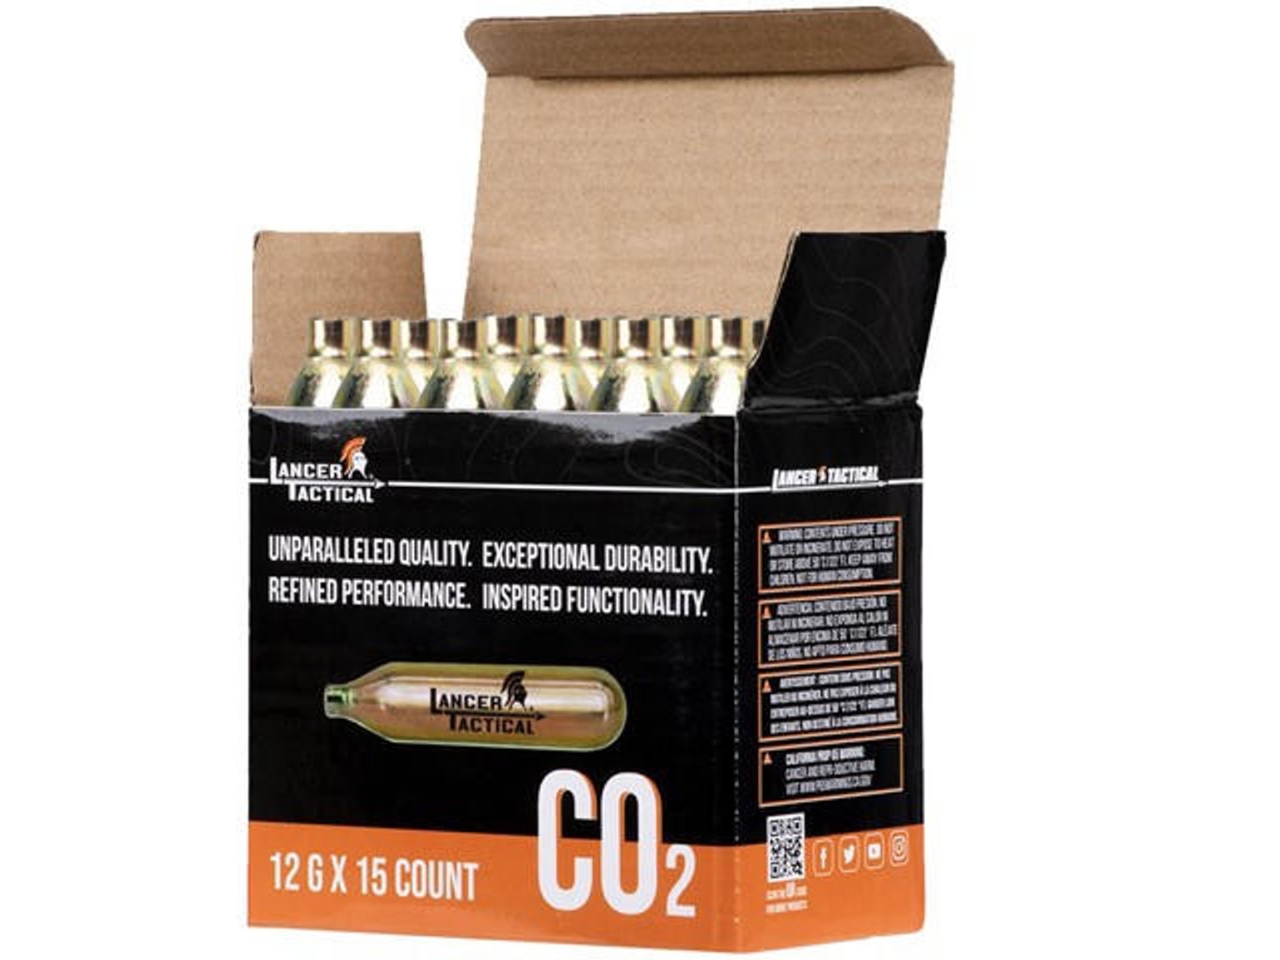 Lancer Tactical 12g CO2 Cartridges for Airsoft/Airguns, 15 Pack